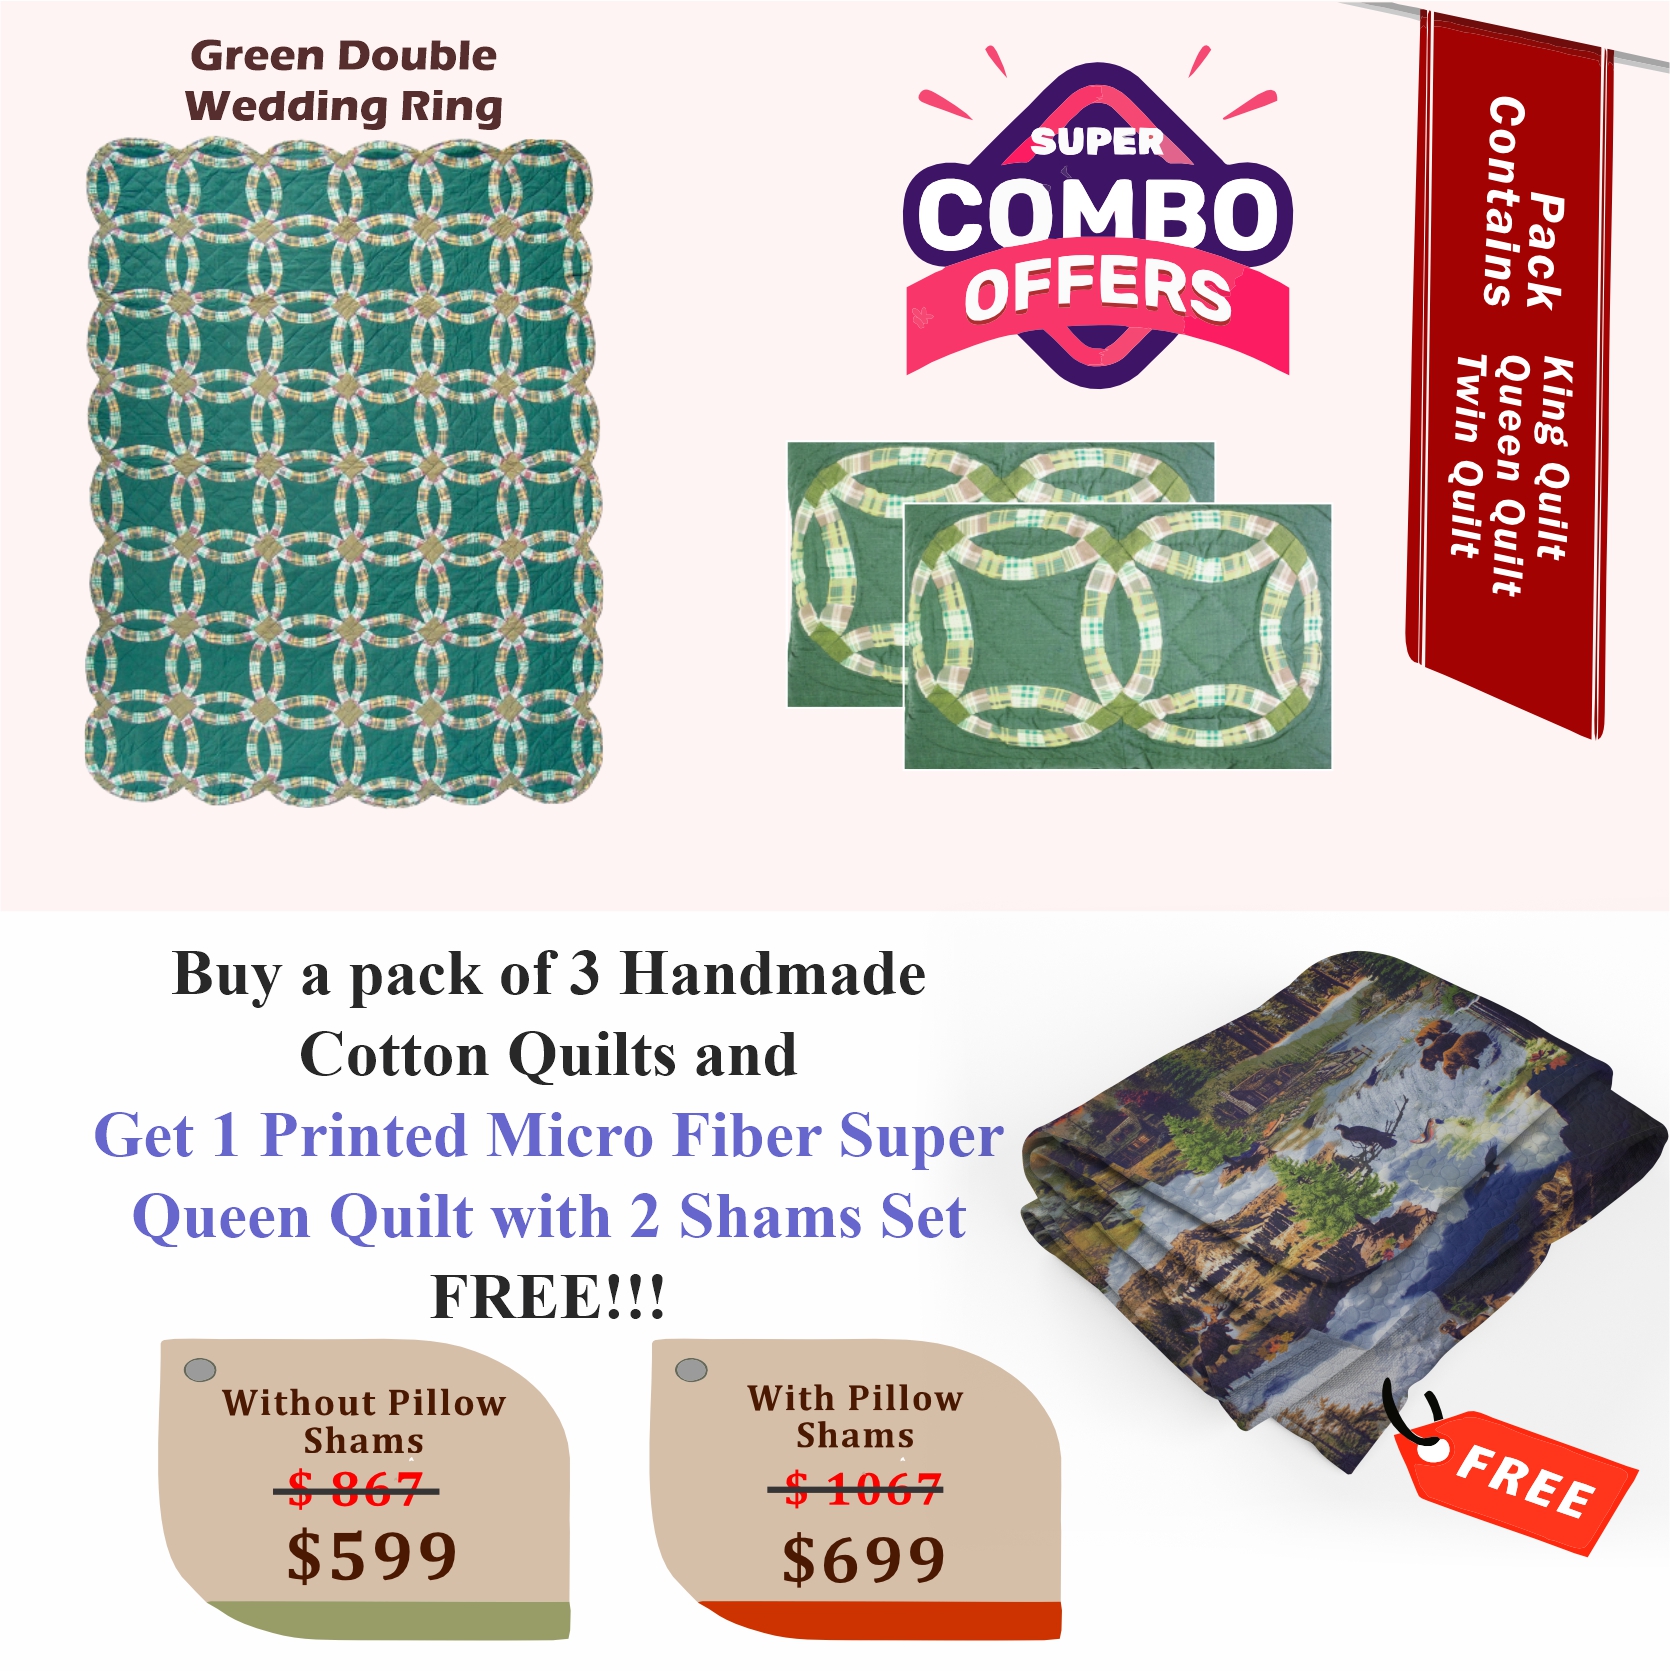 Green Cats Eye - Handmade Cotton quilts  | Buy 3 cotton quilts and get 1 Printed Microfiber Super Queen Quilt with 2 Shams set FREE